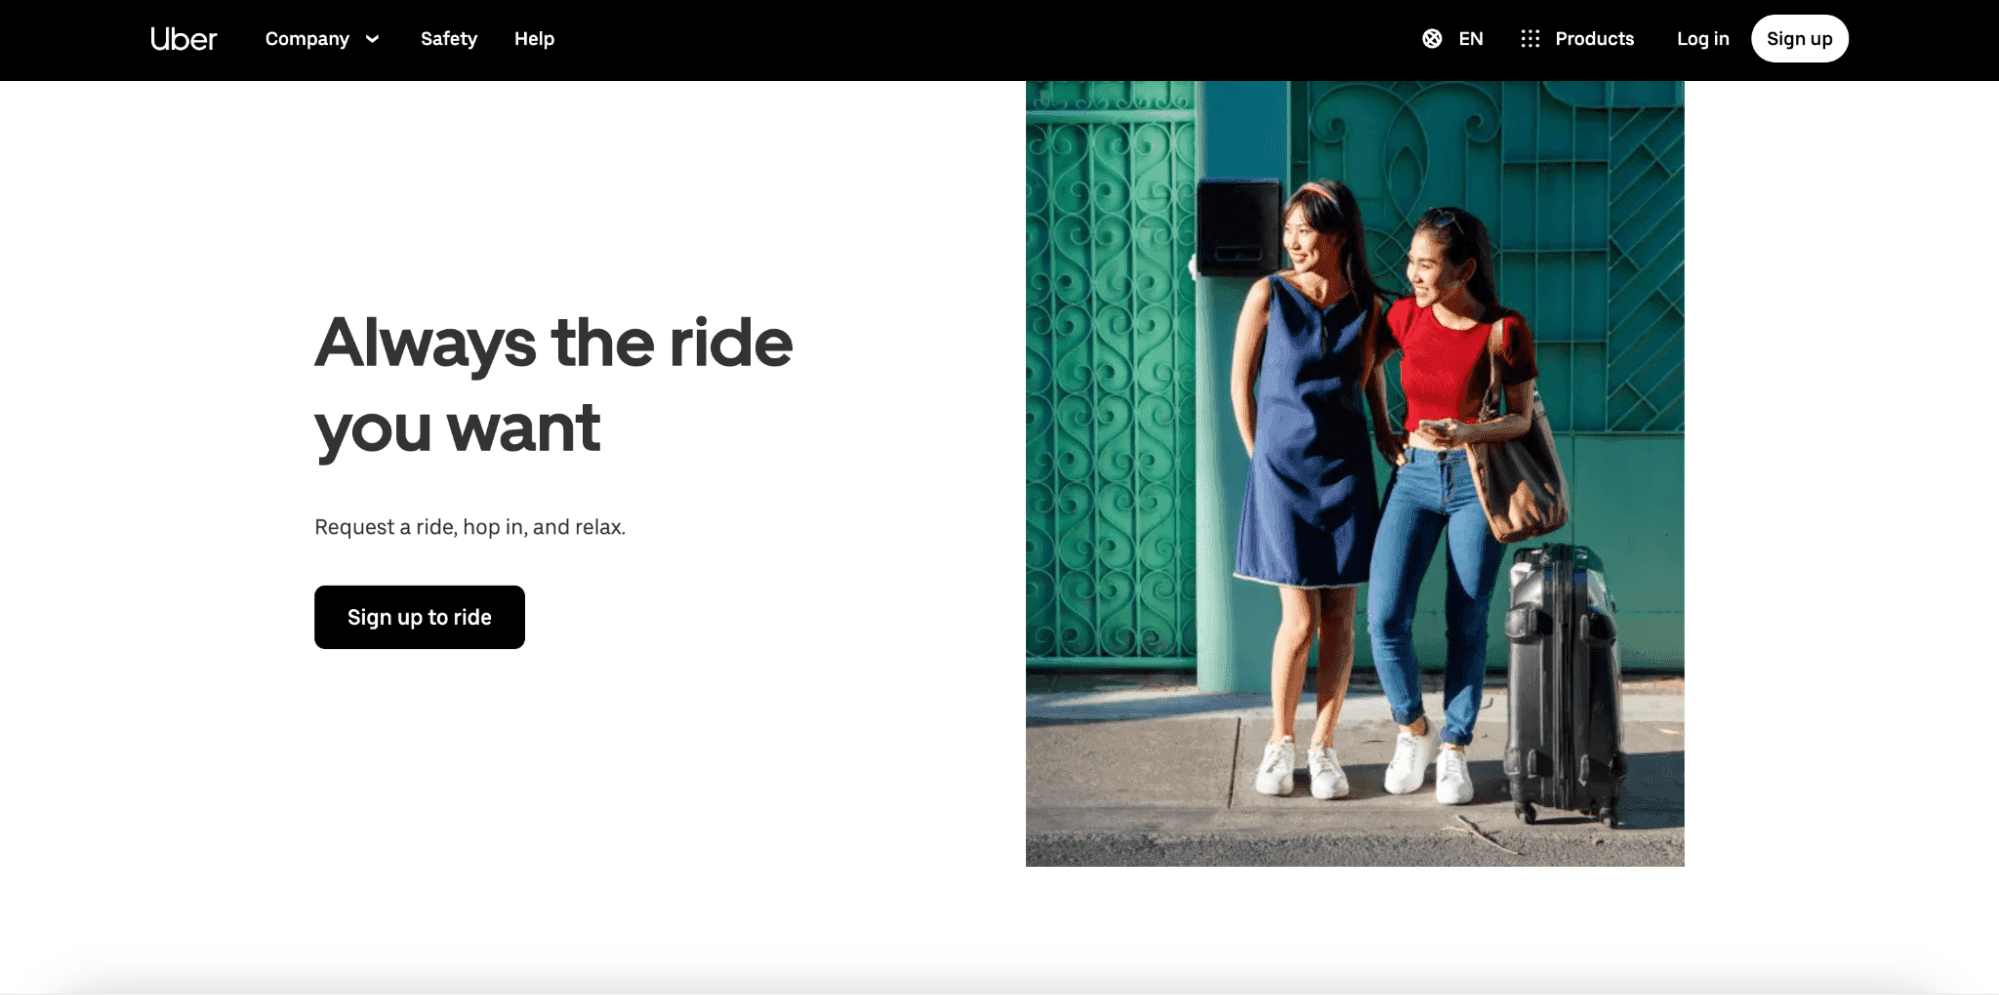 Uber signup webpage with the header "Always the ride you want"